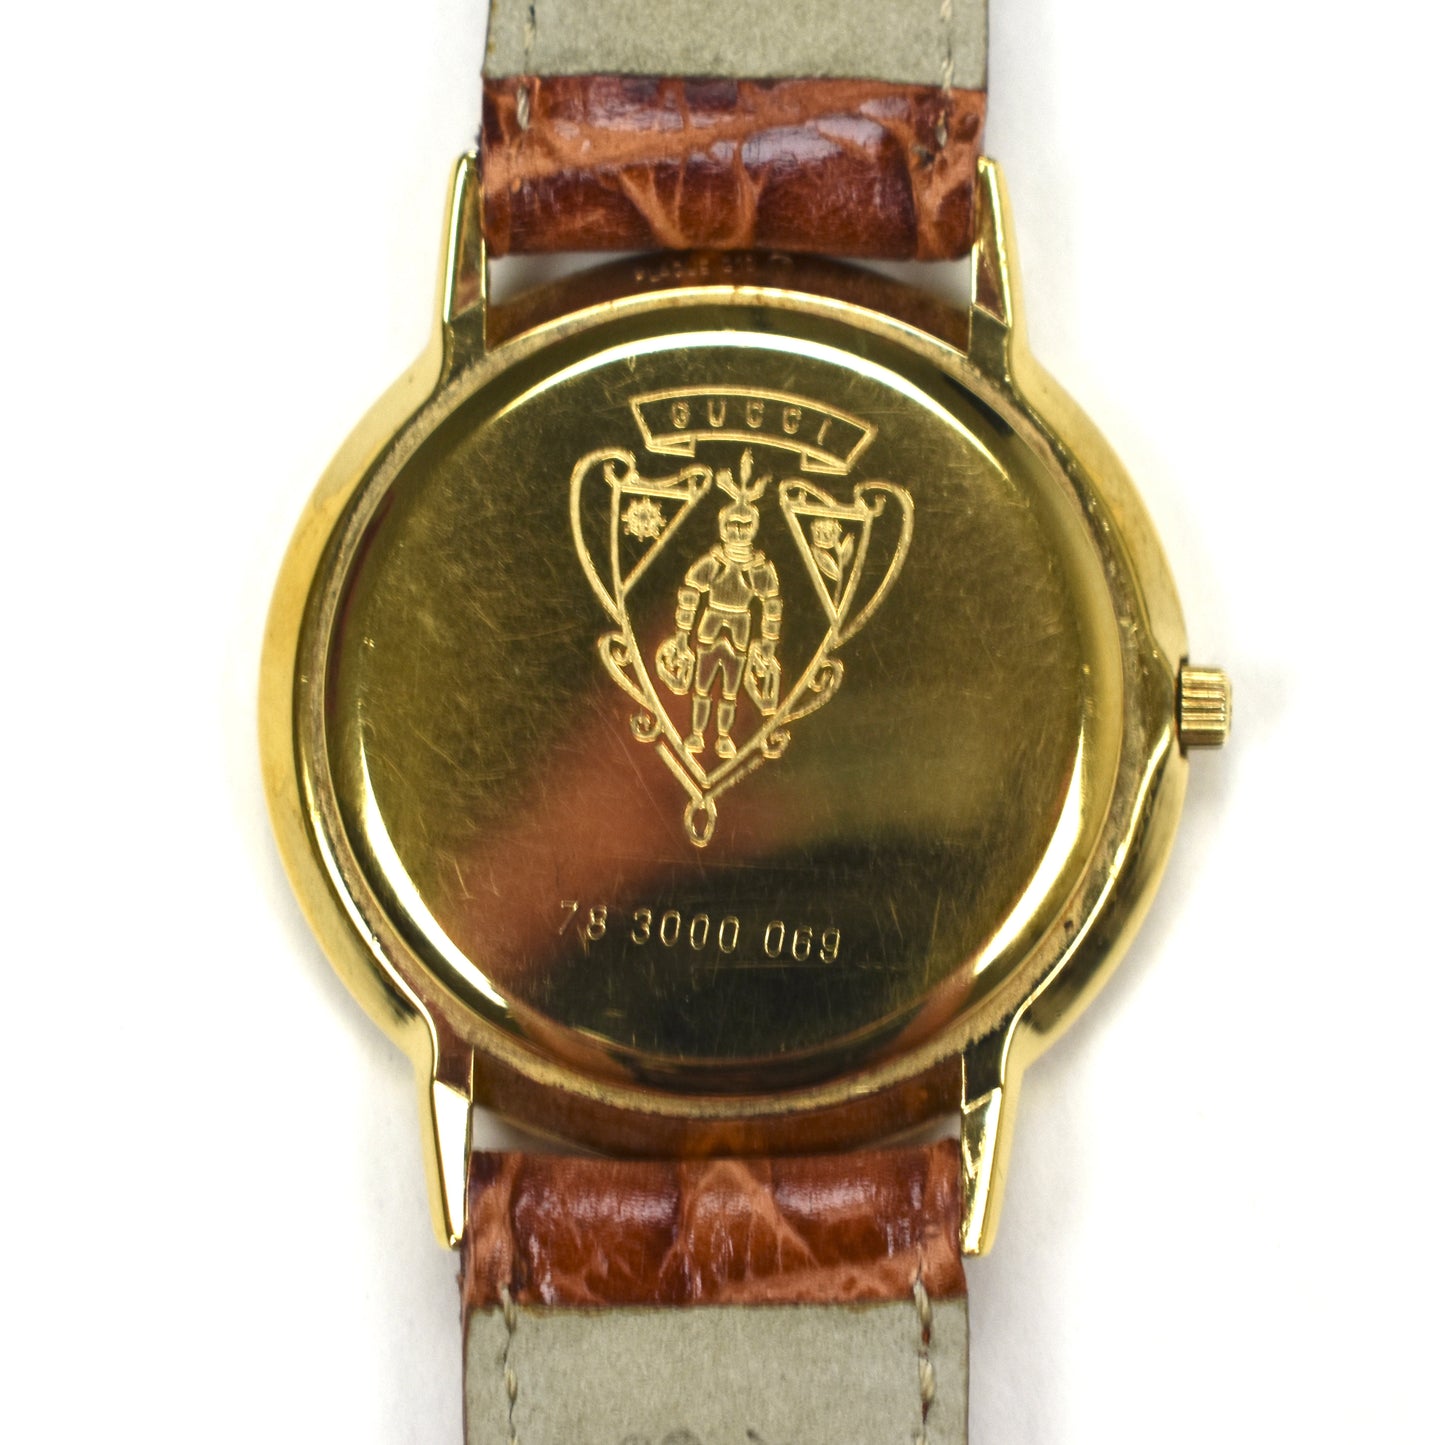 Gucci - 3000M Gold Web Dial Watch (80s)